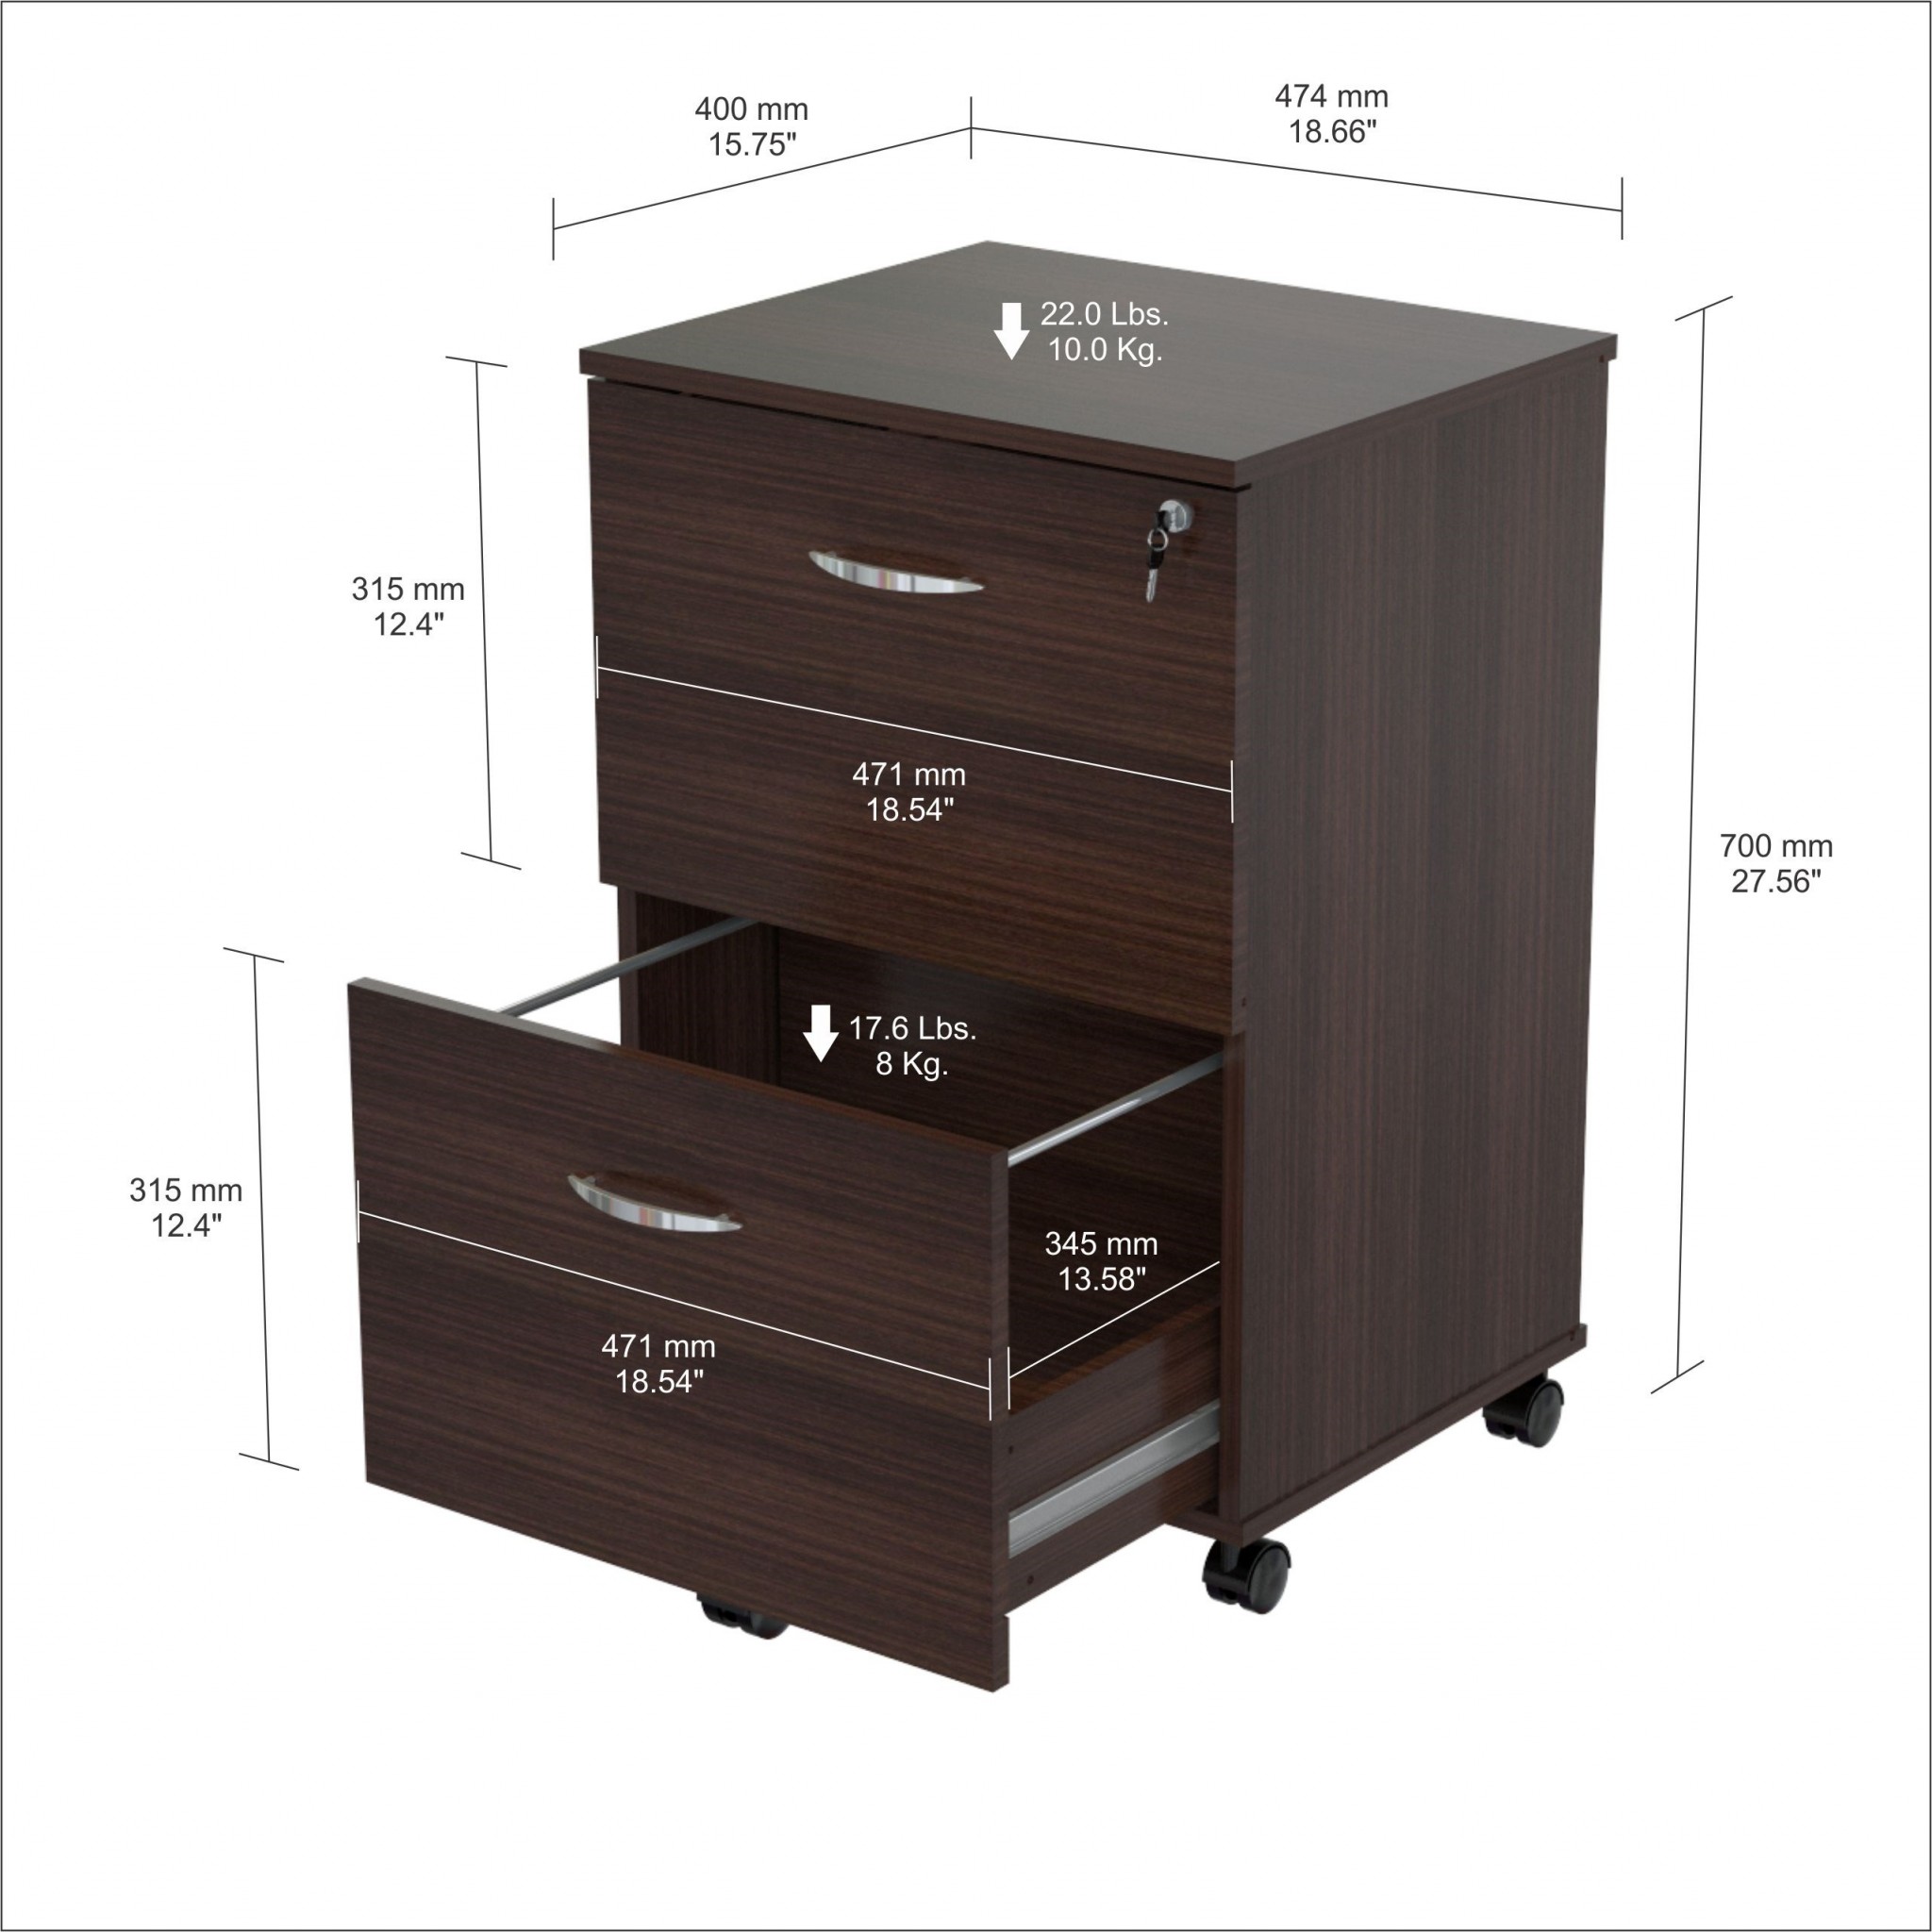 27.6" Espresso Melamine and Engineered Wood File Cabinet with Two Drawers